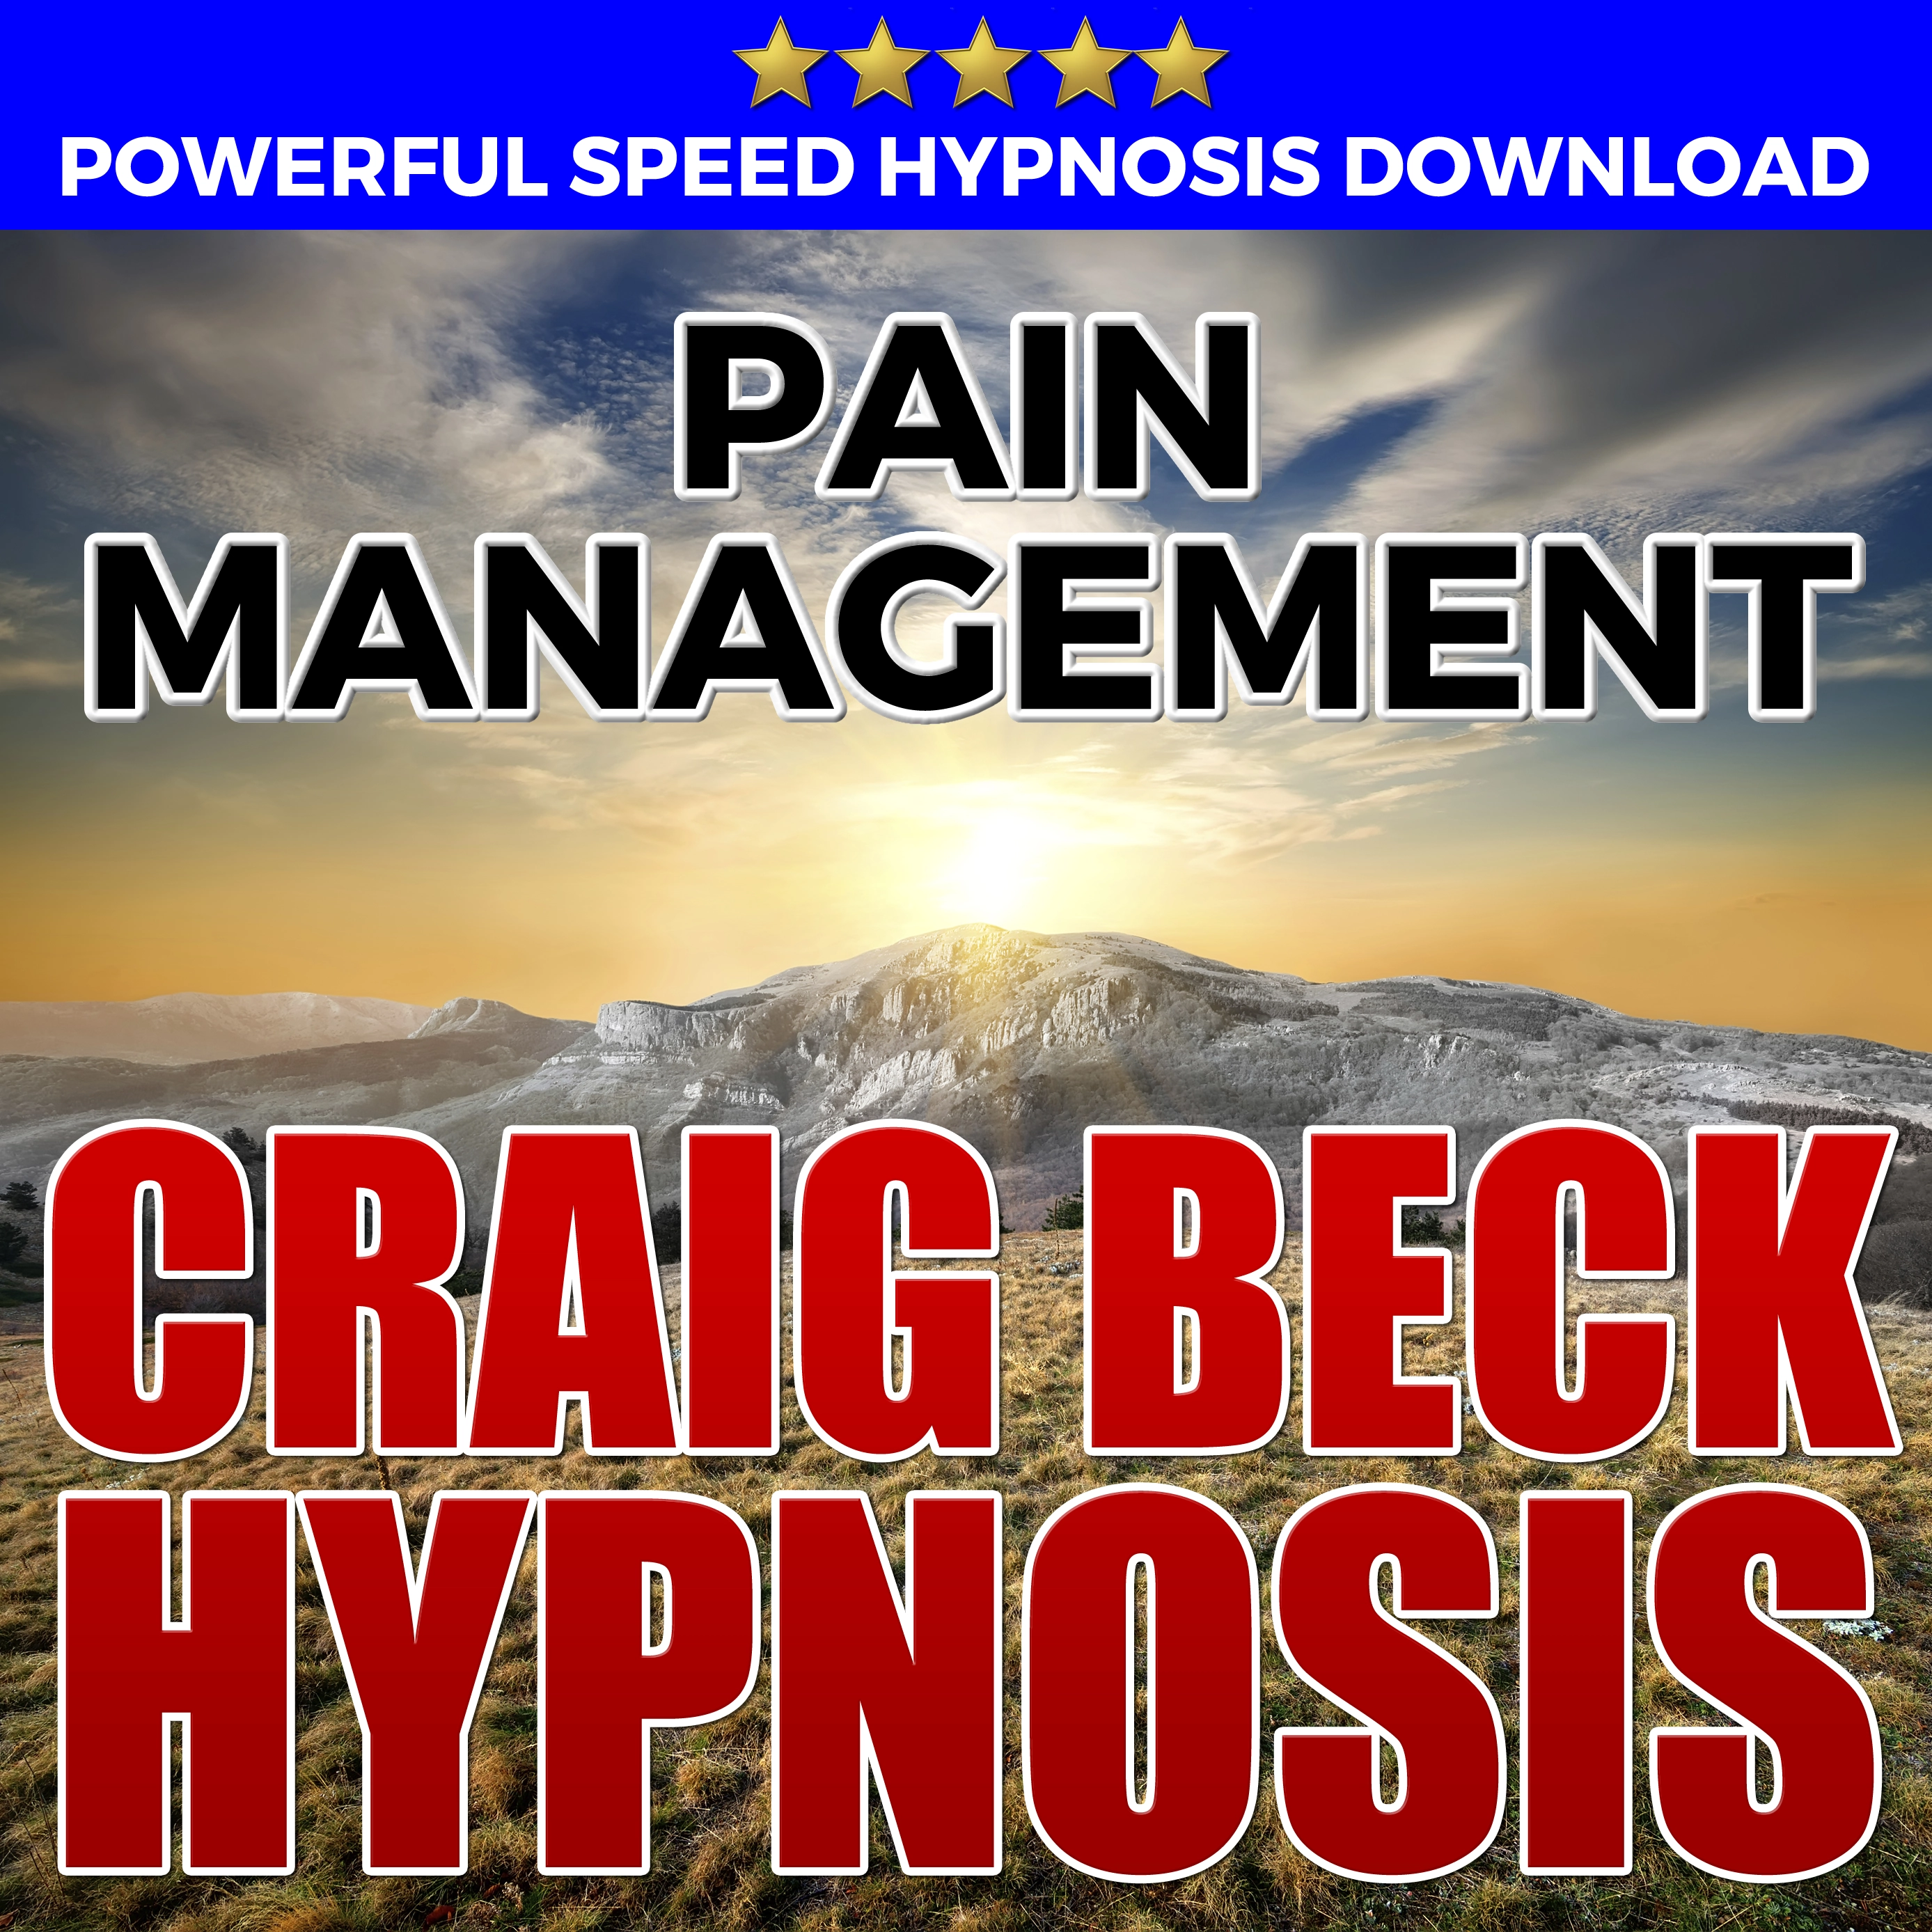 Pain Management: Hypnosis Downloads Audiobook by Craig Beck